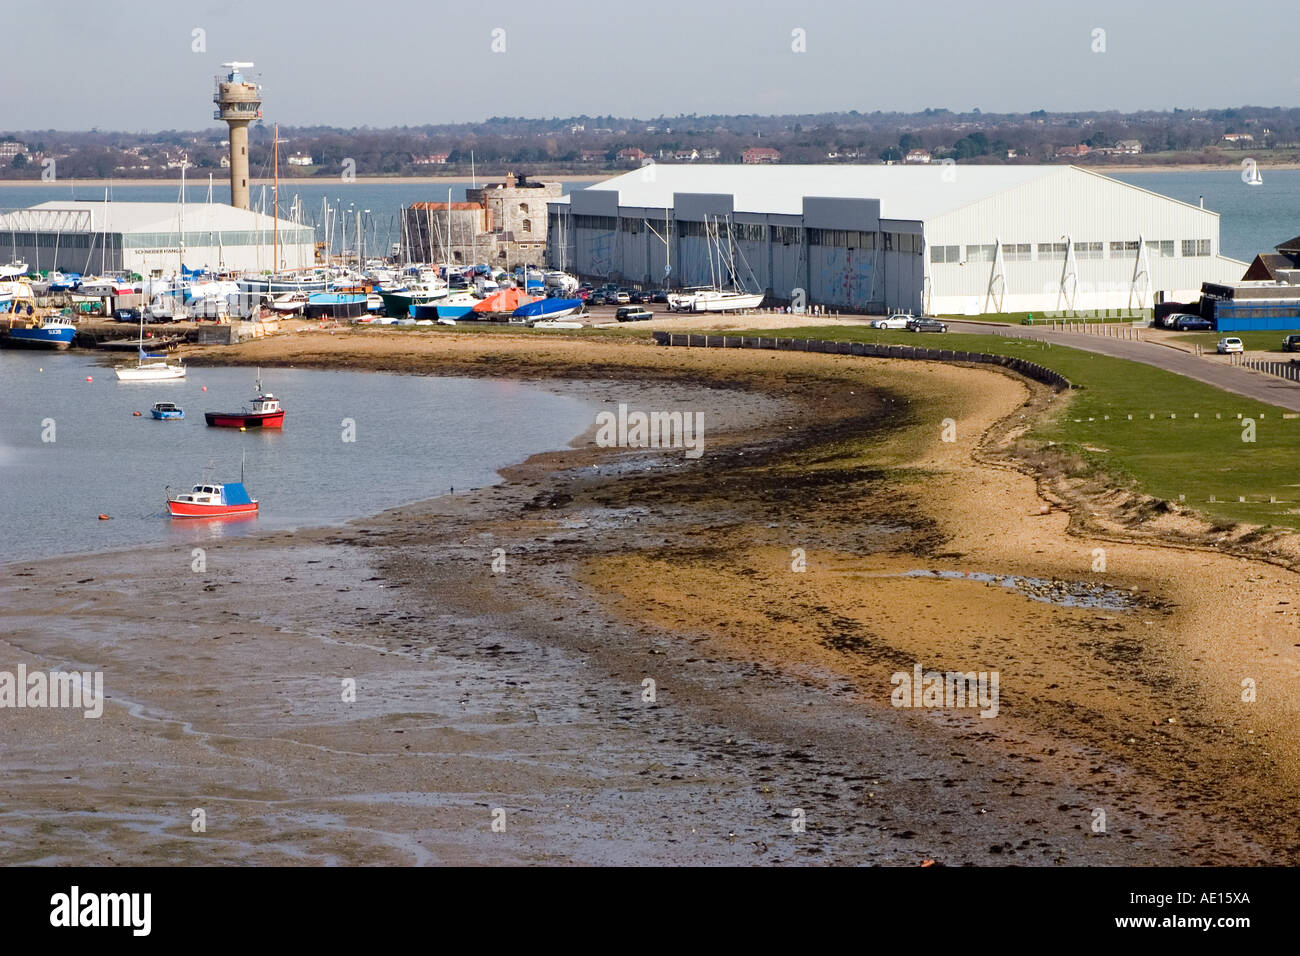 Calshot Activity Centre sports old aircraft hangers Stock Photo